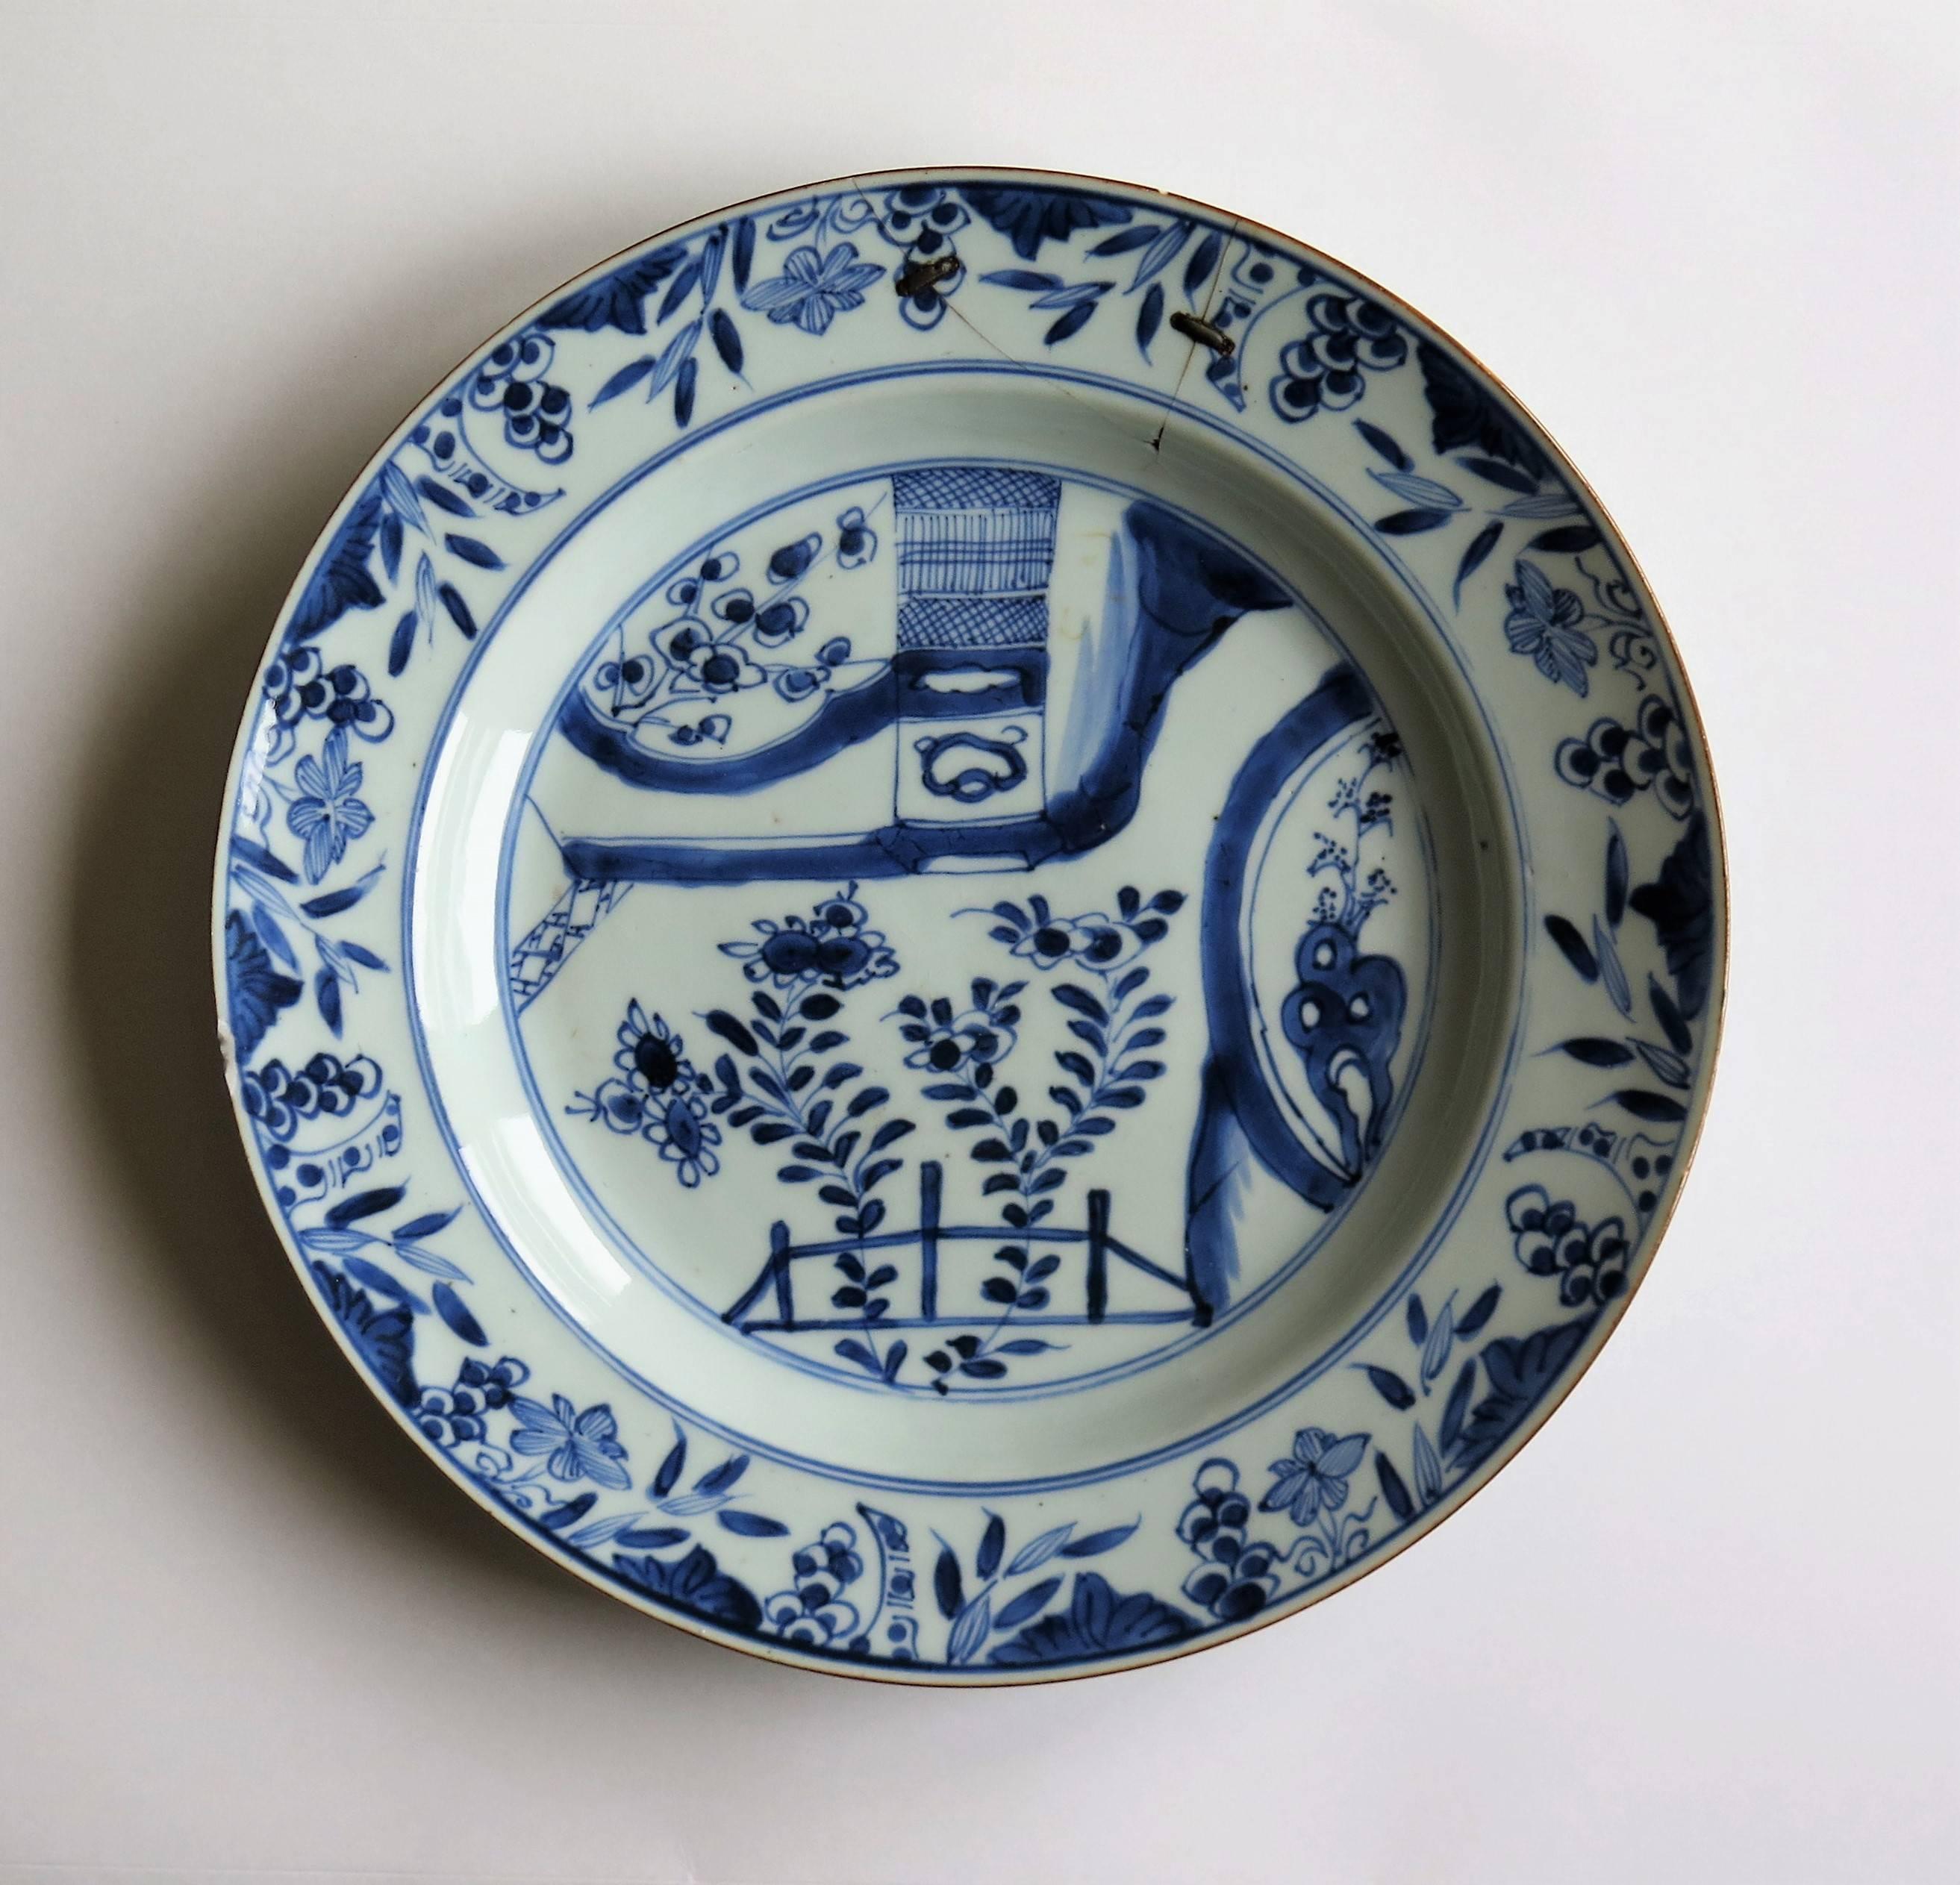 This is a Large Diameter (11 inches) and beautifully hand-painted Chinese porcelain plate and makes a superb display or wall plate.

The plate is finely potted with a carefully cut base rim and a lovely rich glassy light blue glaze.

The plate is